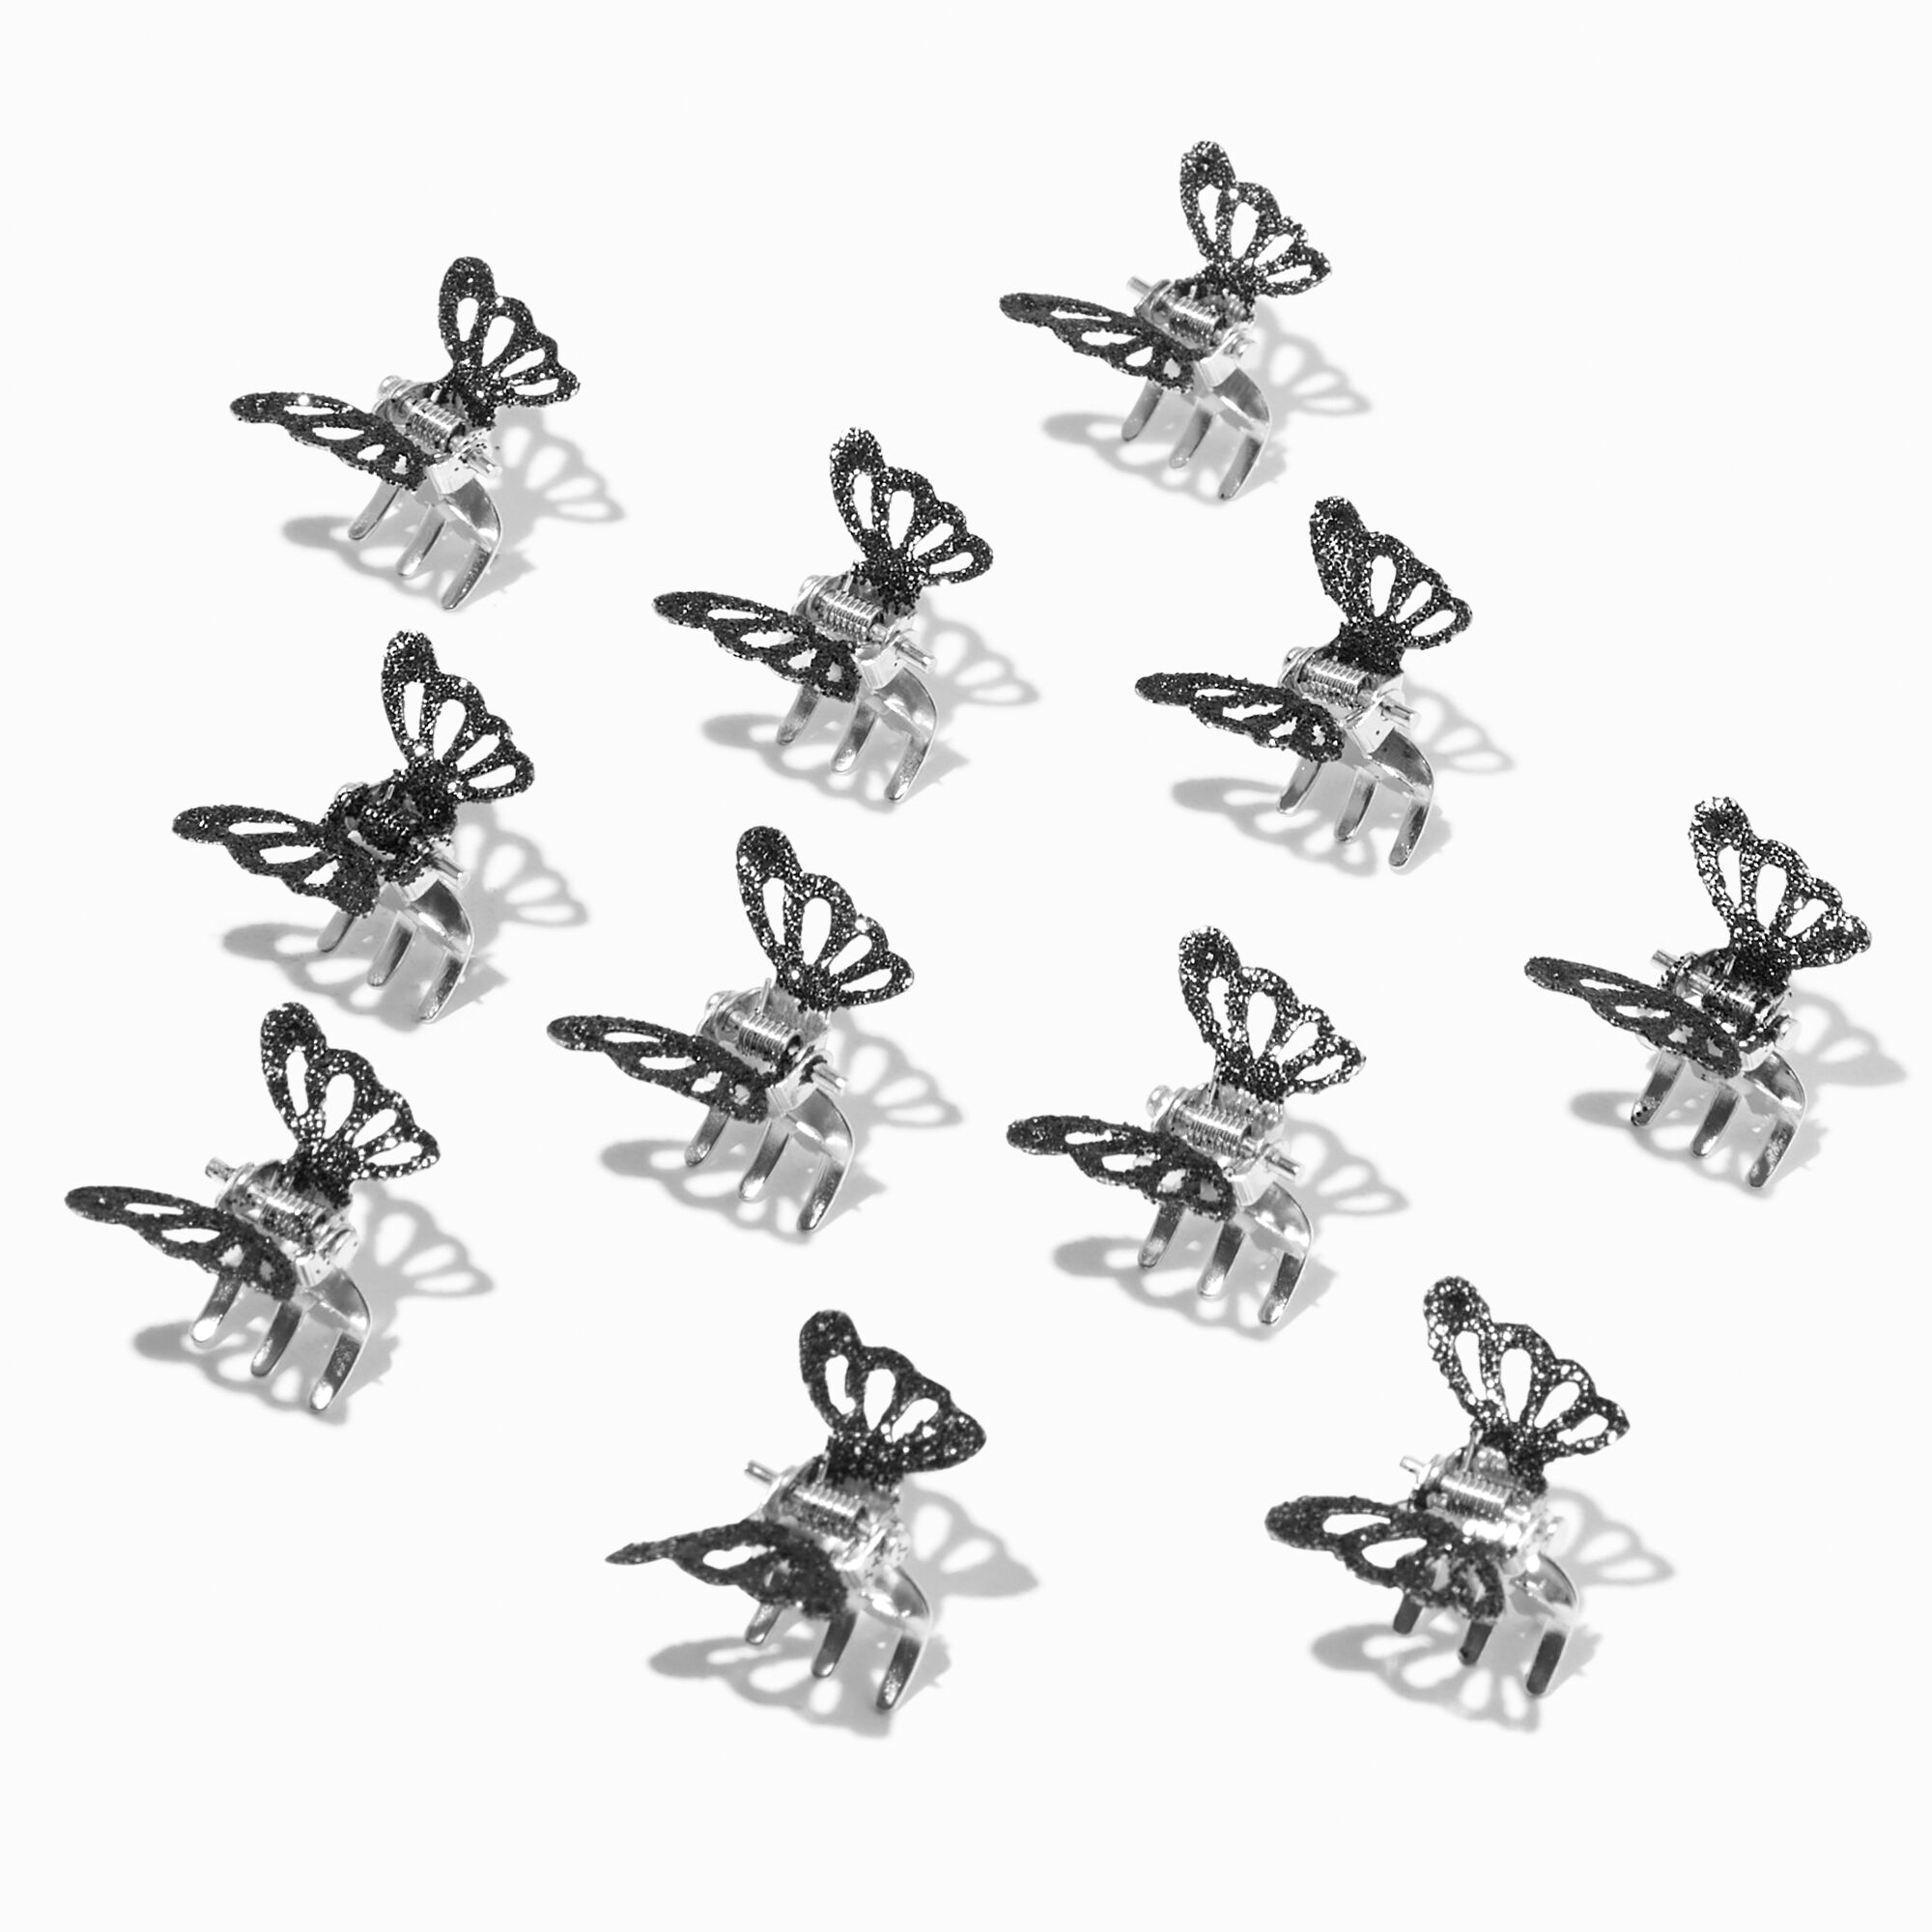 View Claires Glittery Butterfly Mini Hair Claws 12 Pack Black information